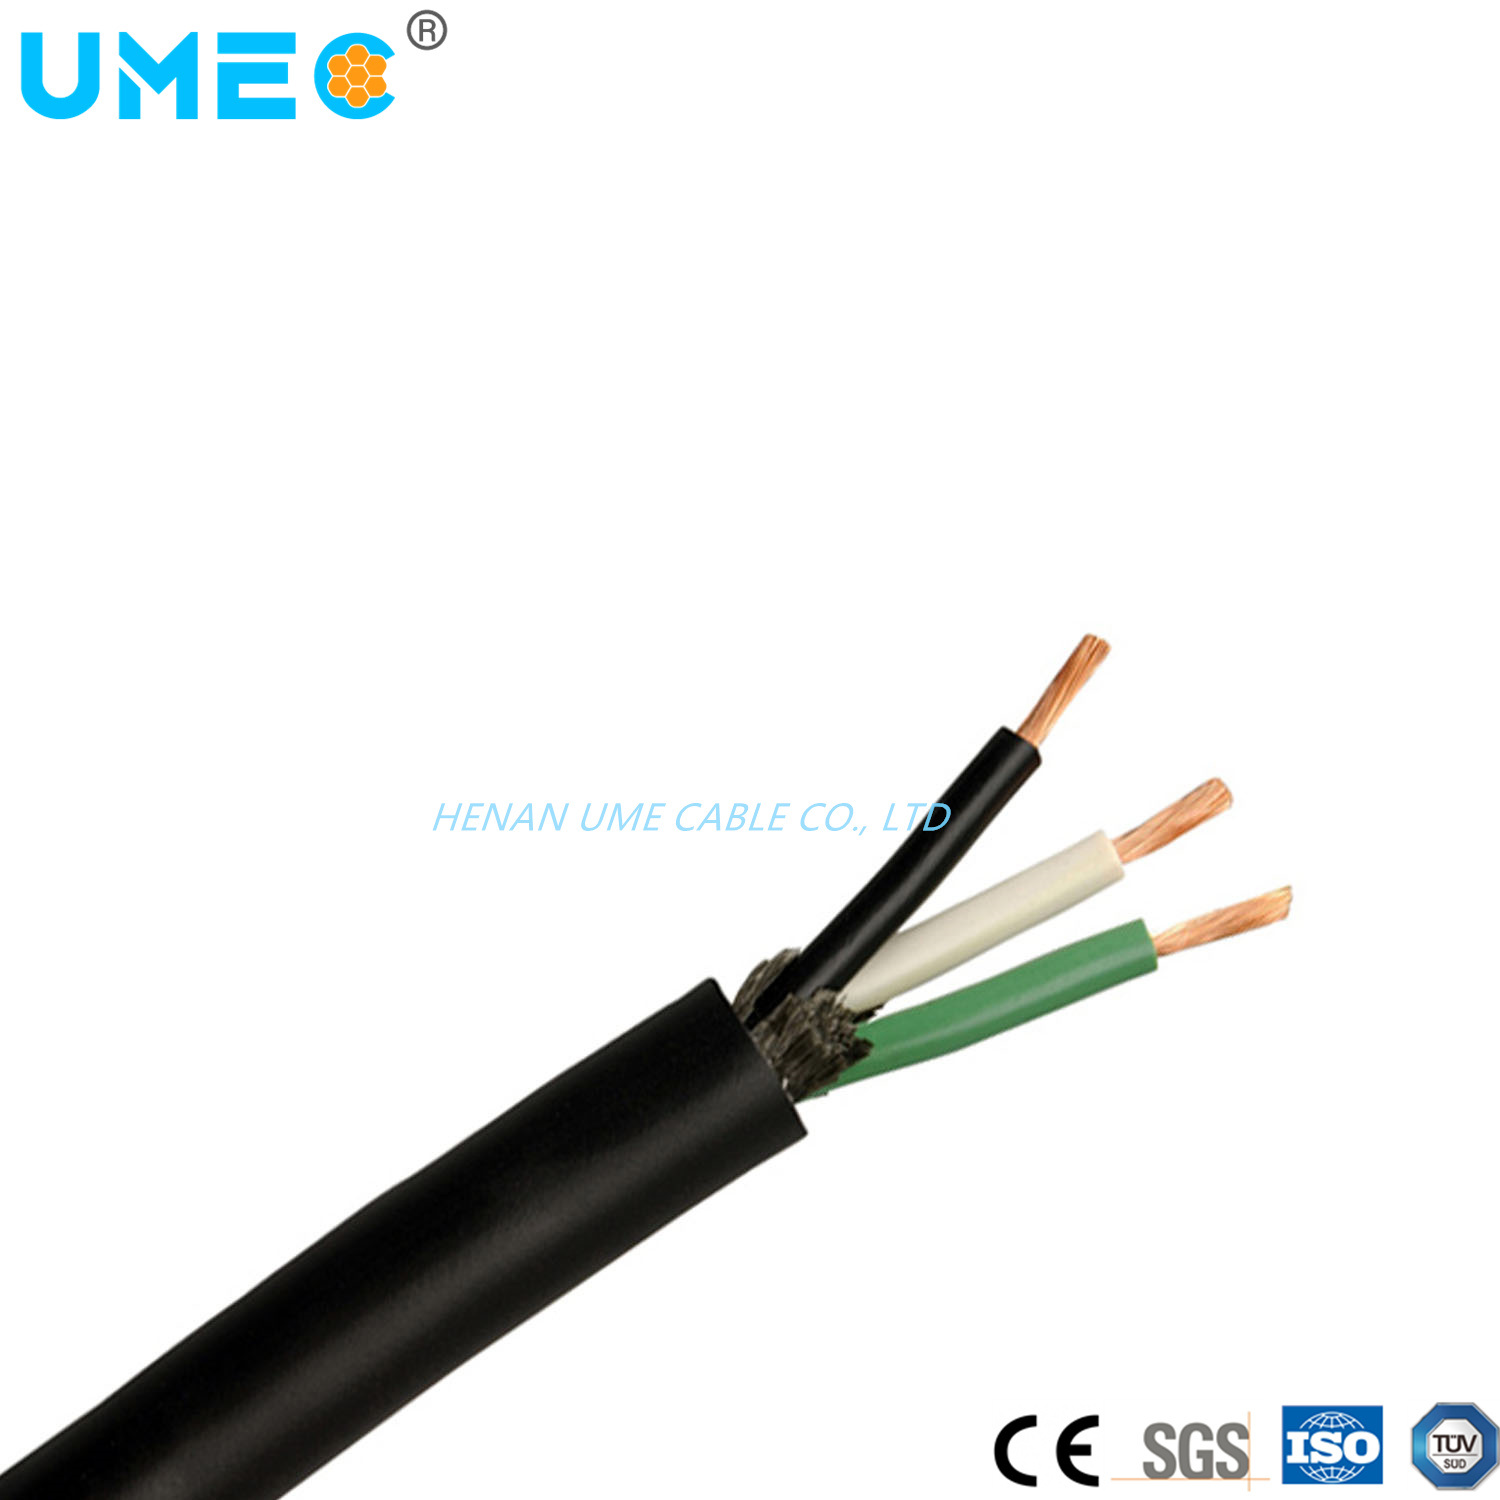 
                Cavo in gomma CPE EPR 600 V cavo flessibile a bassa tensione 3X12AWG 3X10AWG 4X10AWG 4X8AWG così Soow Sjoow
            